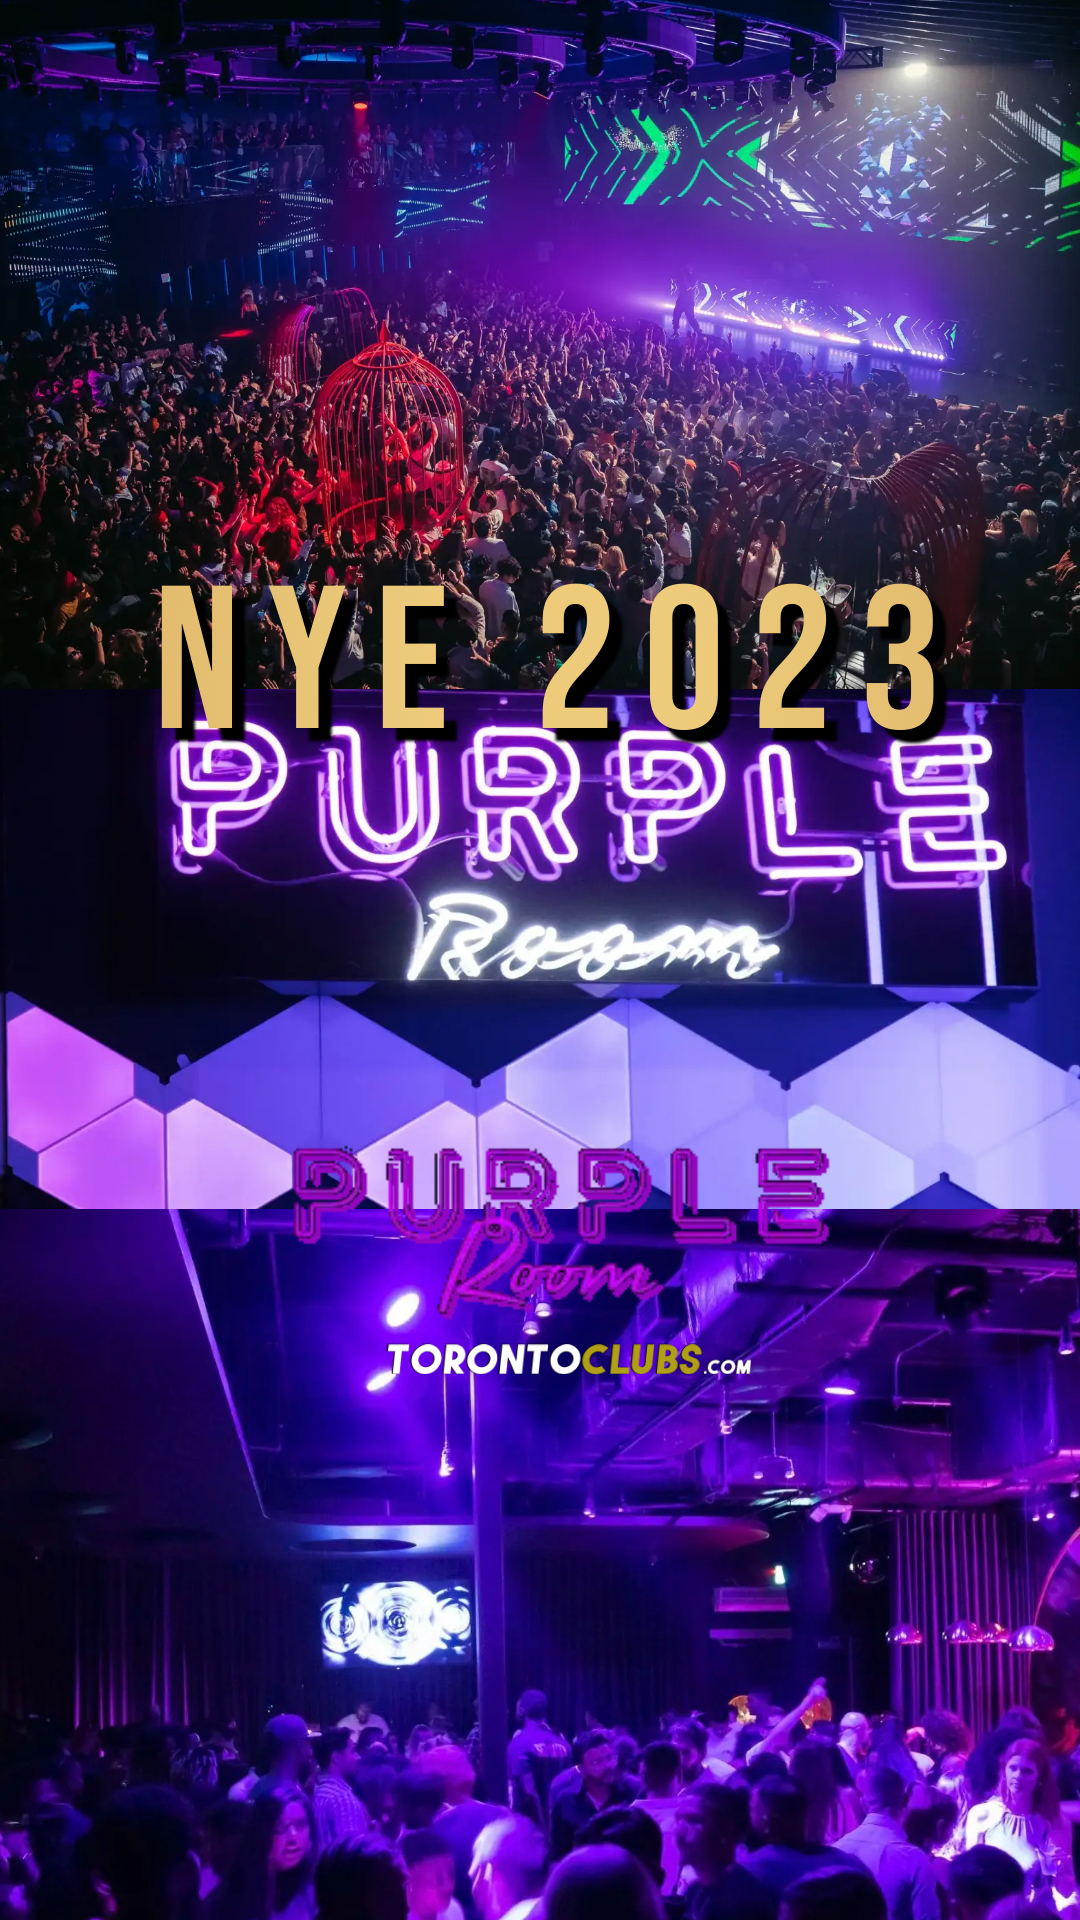 PURPLE ROOM INSIDE REBEL TORONTO NEW YEARS EVE EVENT 2023 HIP HOP PARTY